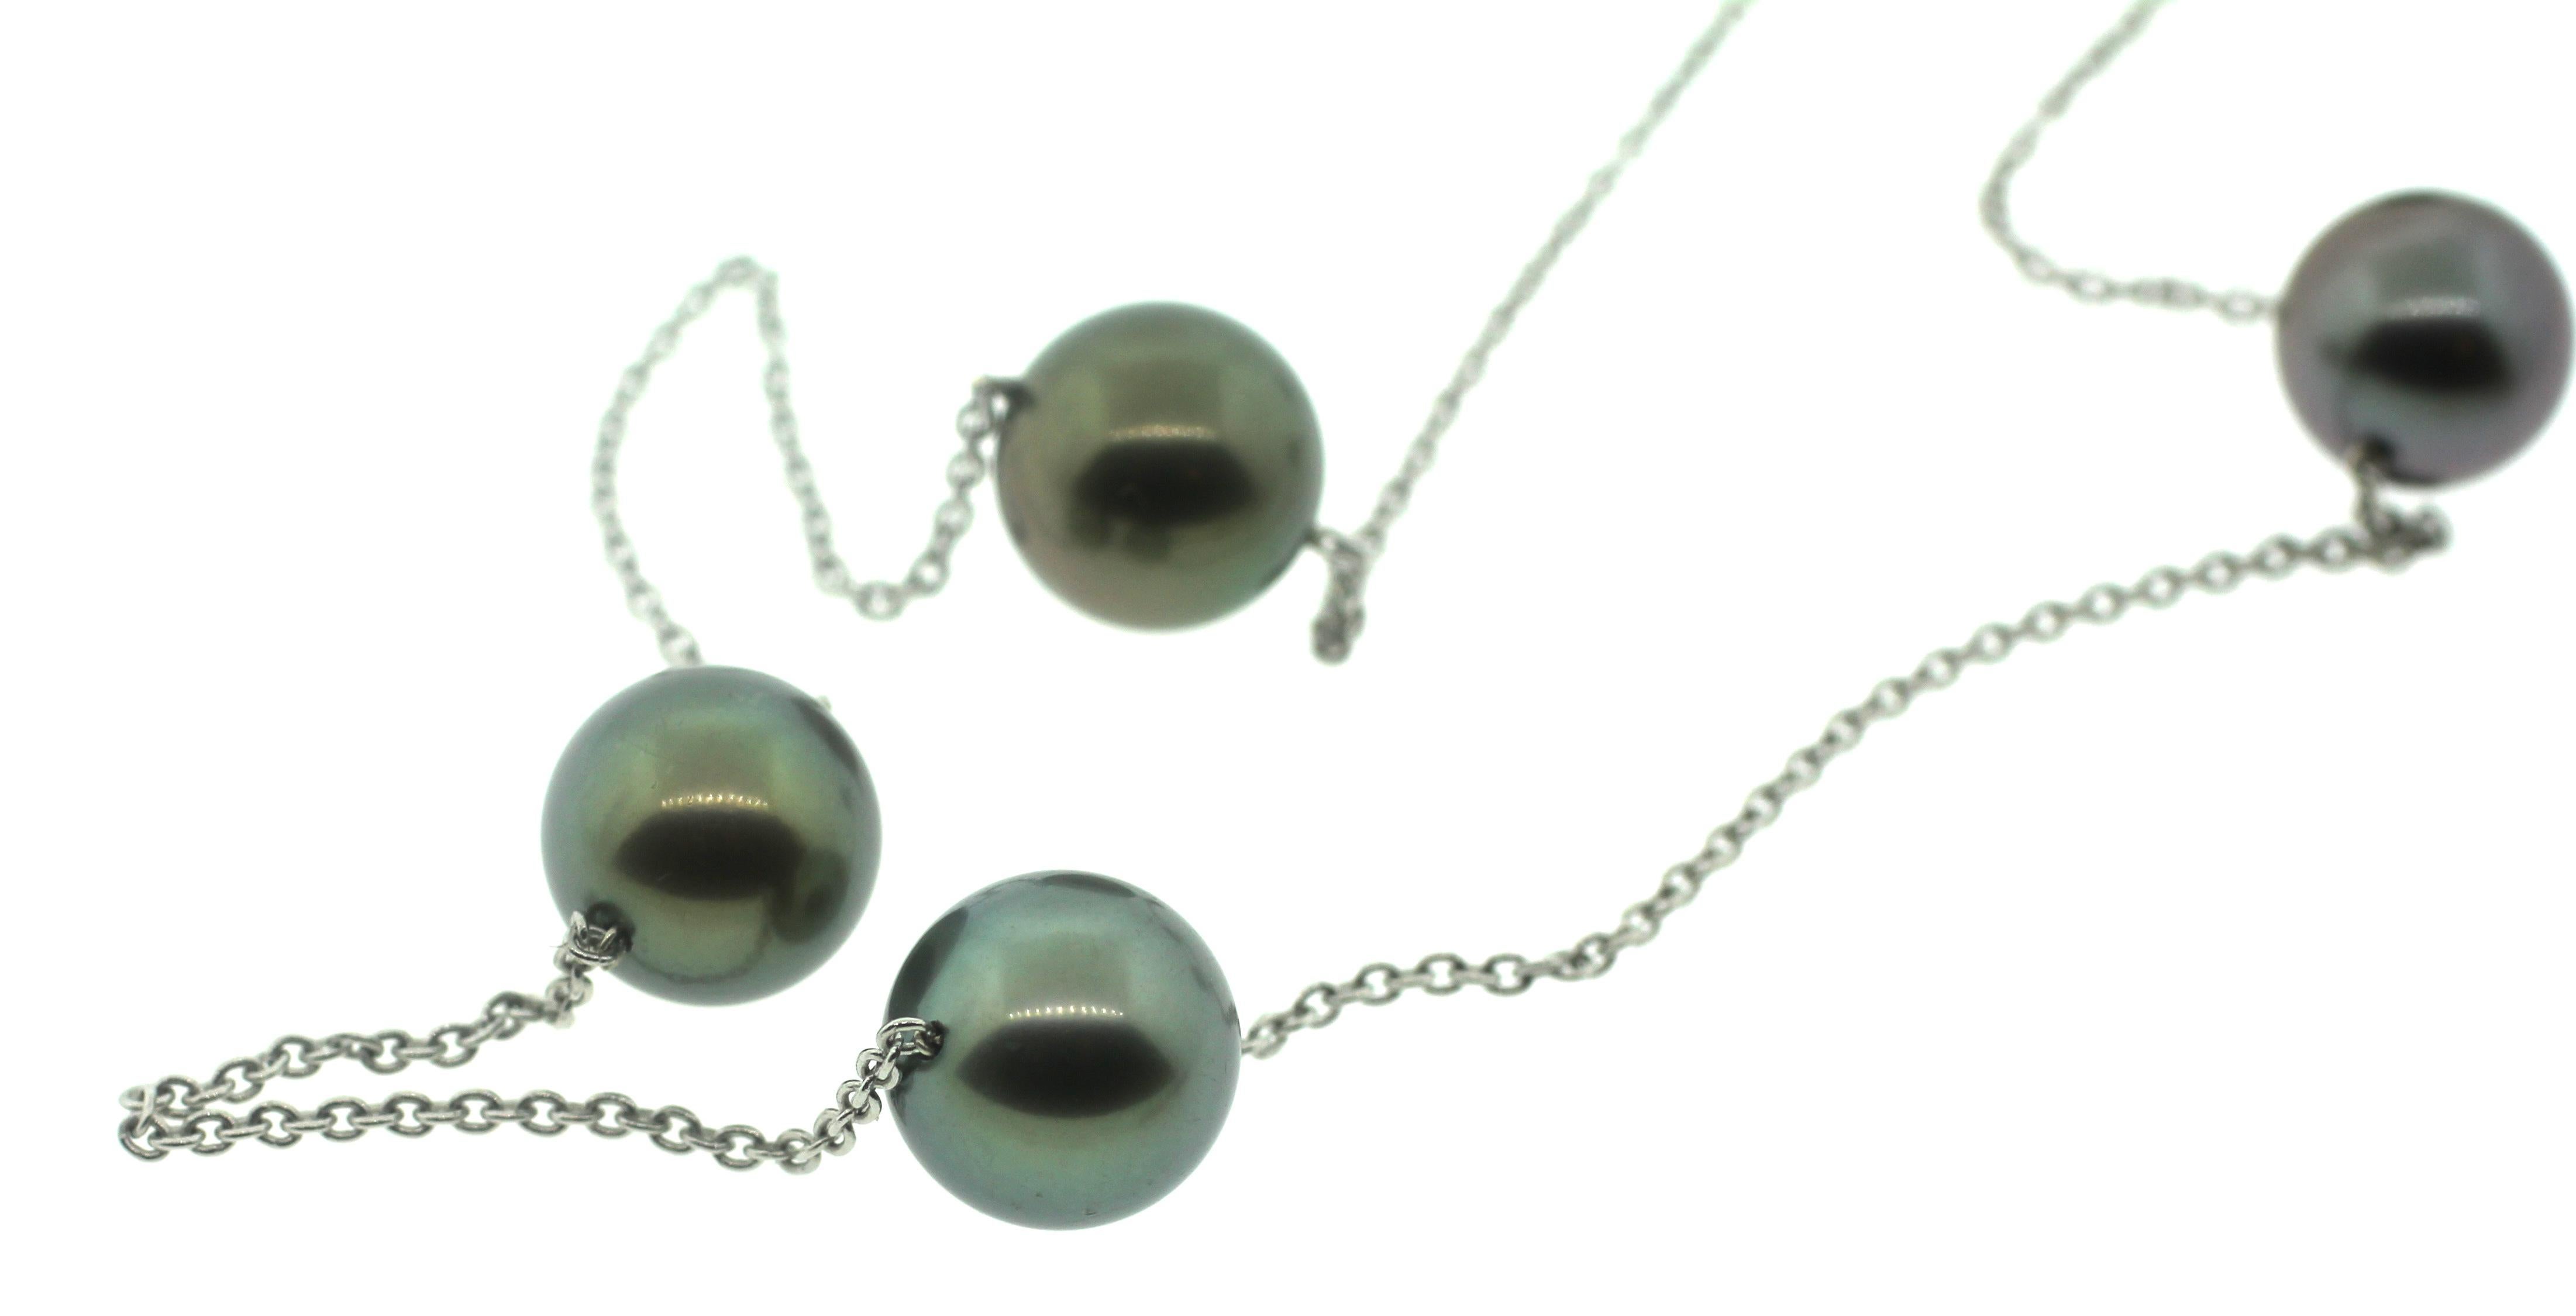 Hakimoto By Jewel Of Ocean Station Necklace
A classic and wearable Natural Color Tahitian Station pearl necklace. 
The necklace is Made with 7 Baroque South Sea Pearls size 10-11mm. 
The pearls are connected by 18 karat gold 
It is Modern And